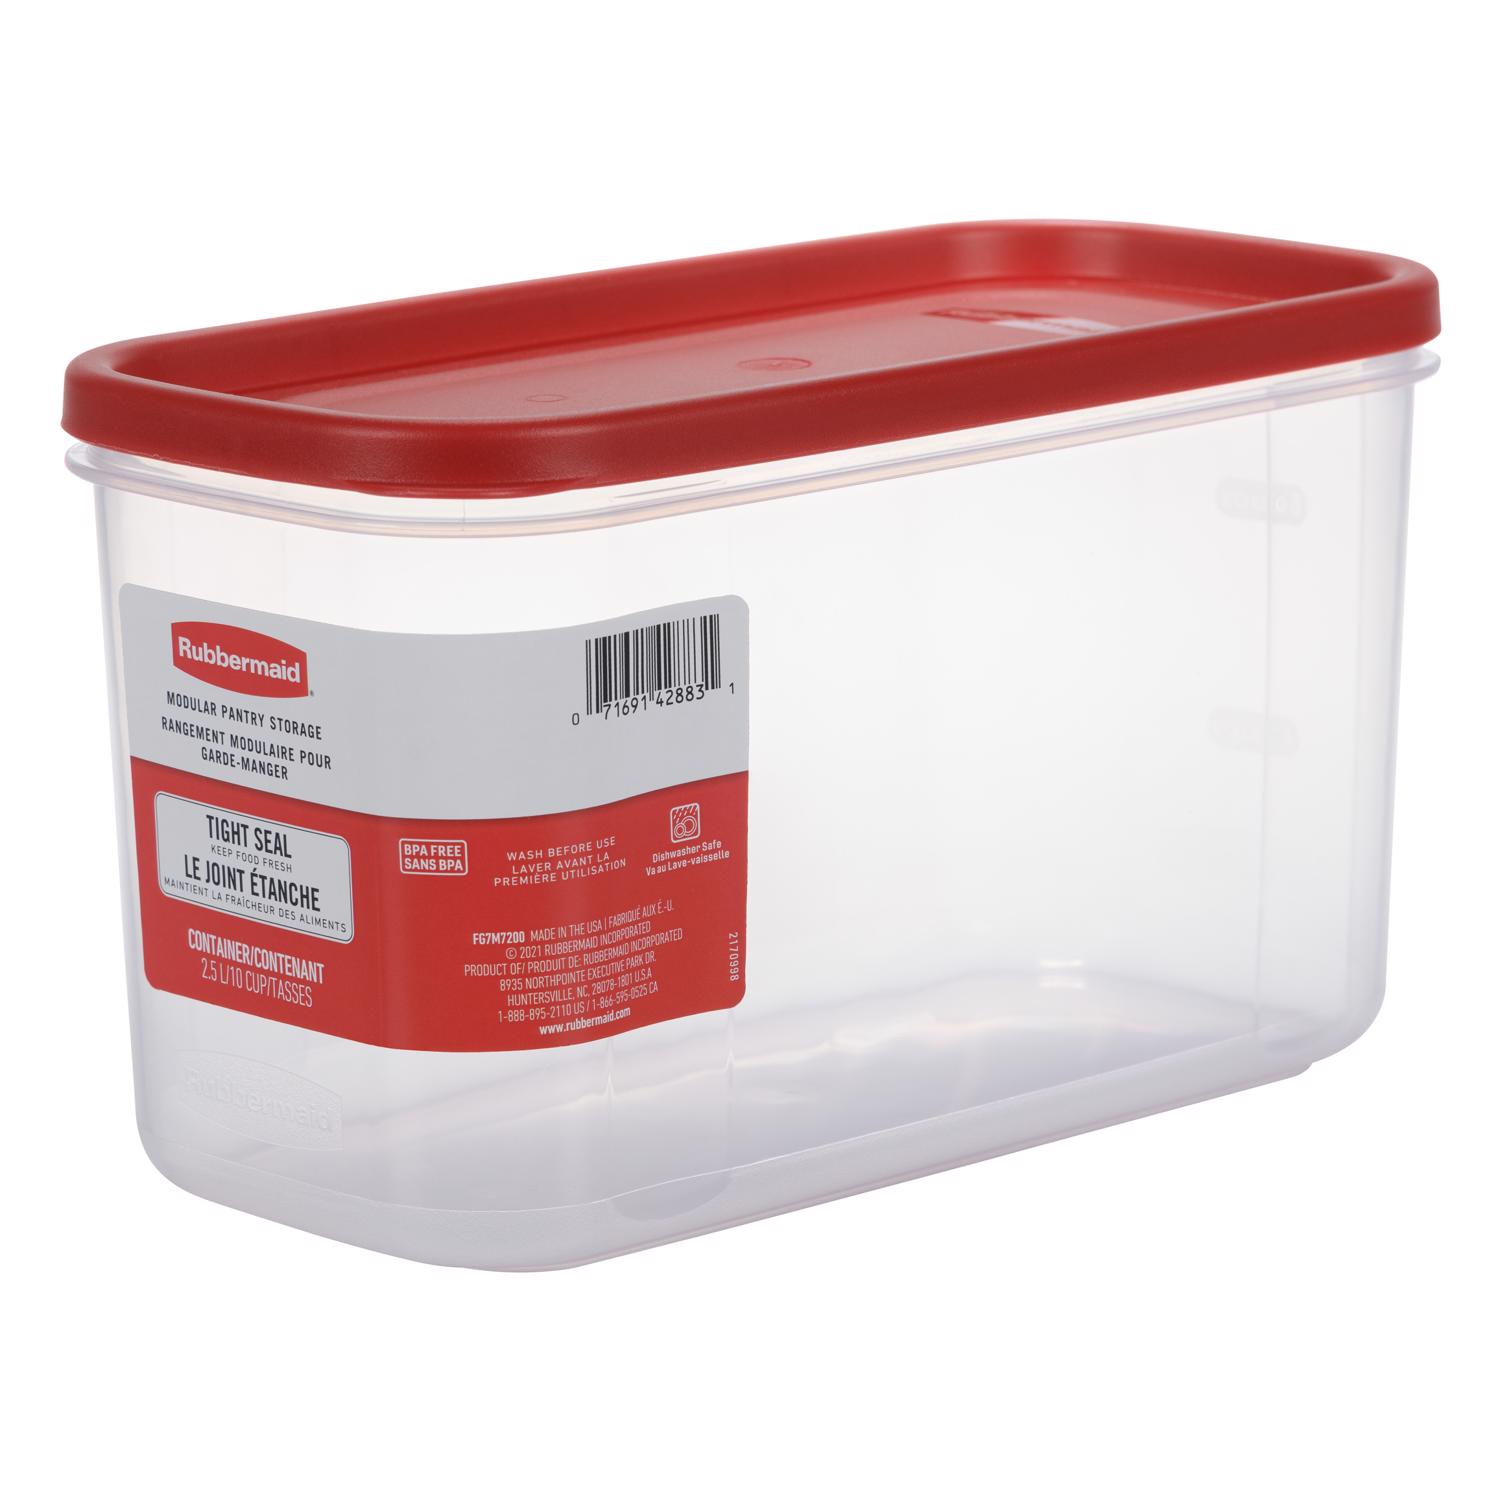 Glad Gladware Entree Plastic Square Containers with Lids, 25 Ounce